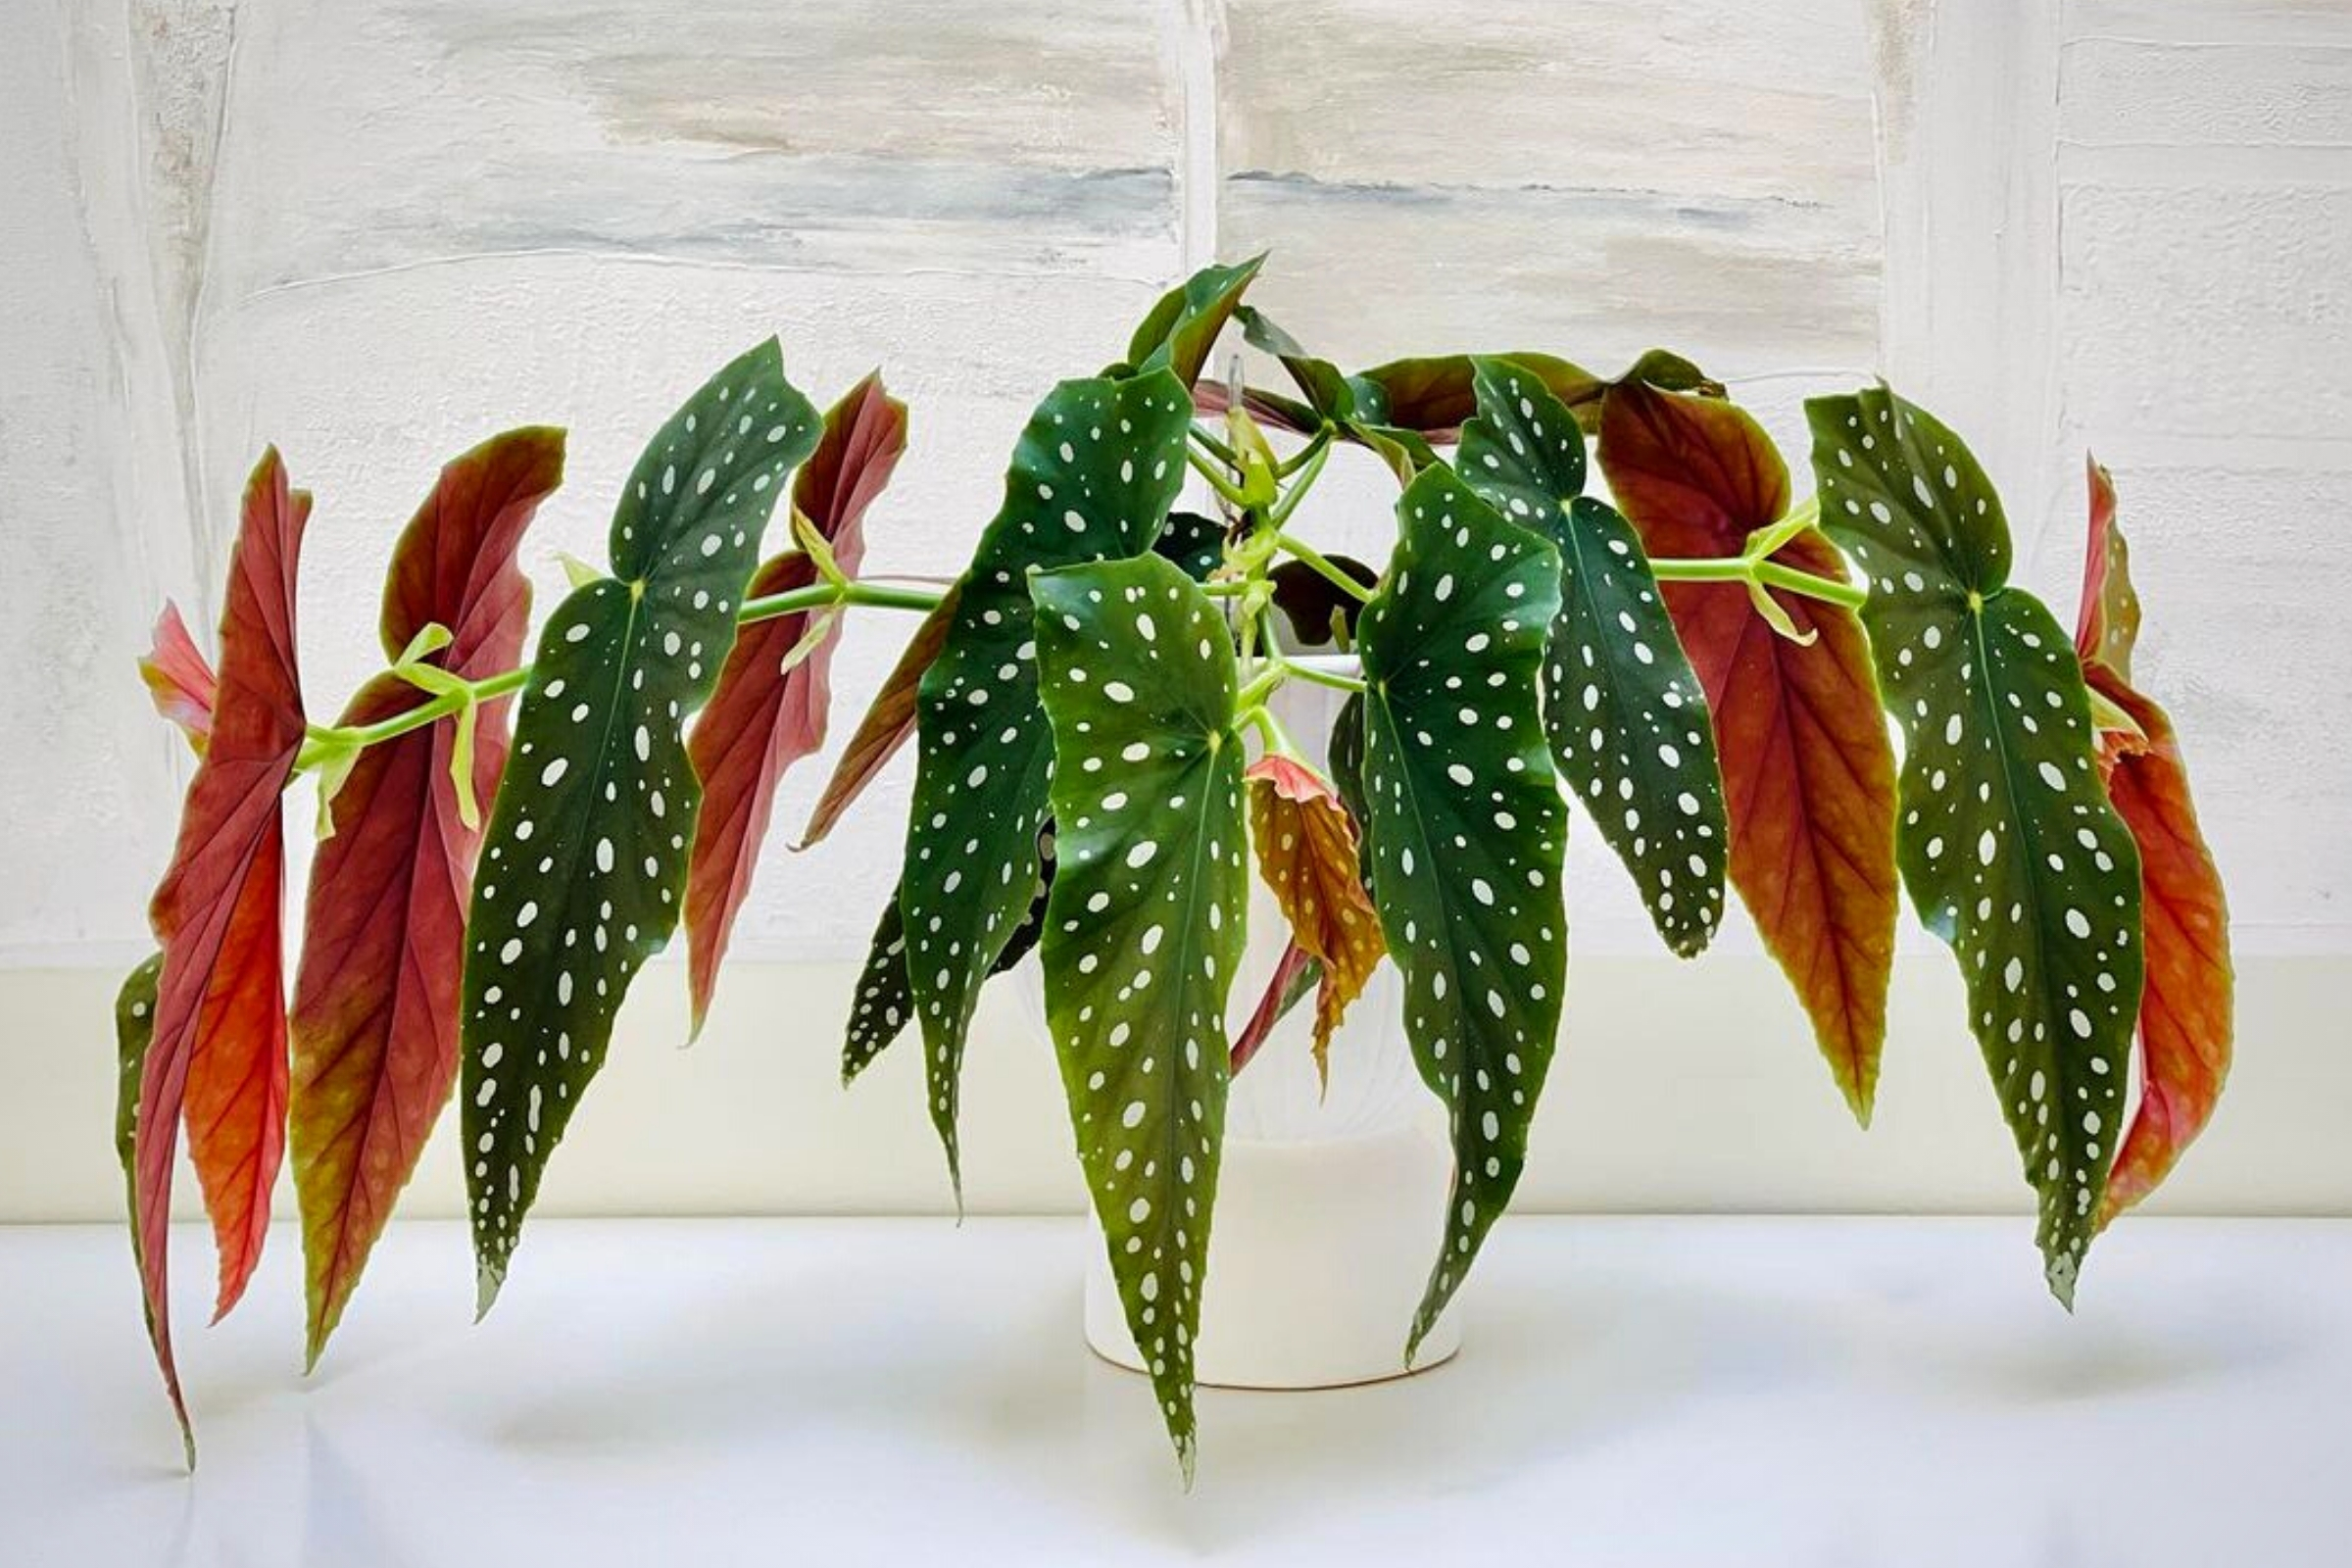 the-polka-dot-begonia-begonia-maculata-is-one-of-the-most-photogenic-houseplants-featured